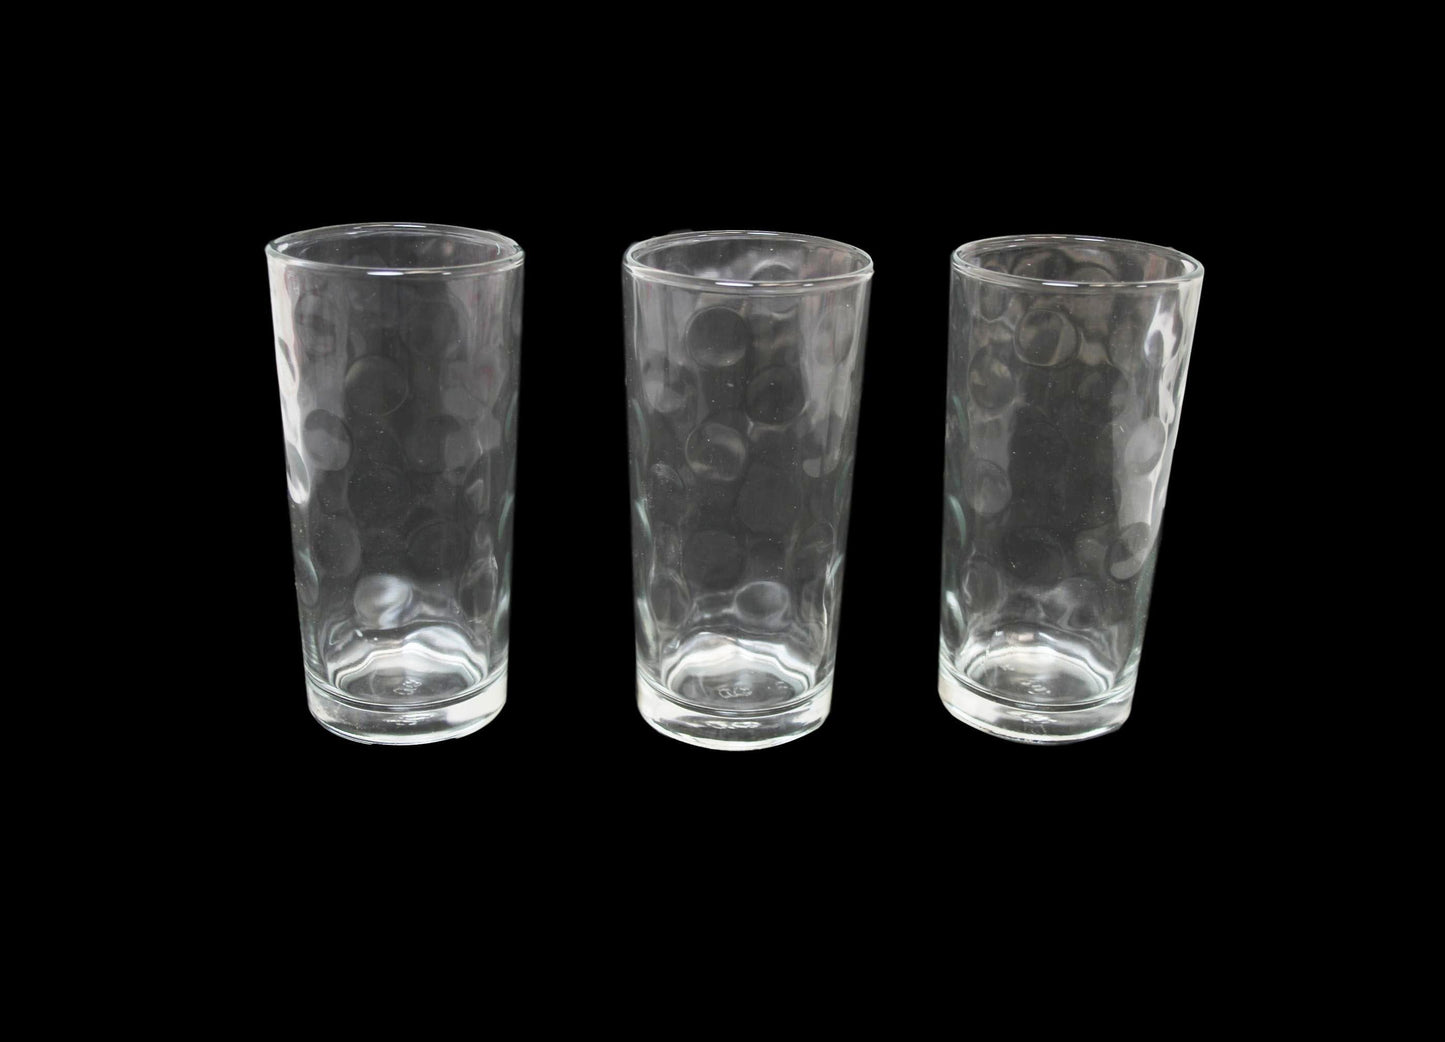 Azur Tumbler Drinking Glass 9oz Pack of 3 0755 (Parcel Rate)